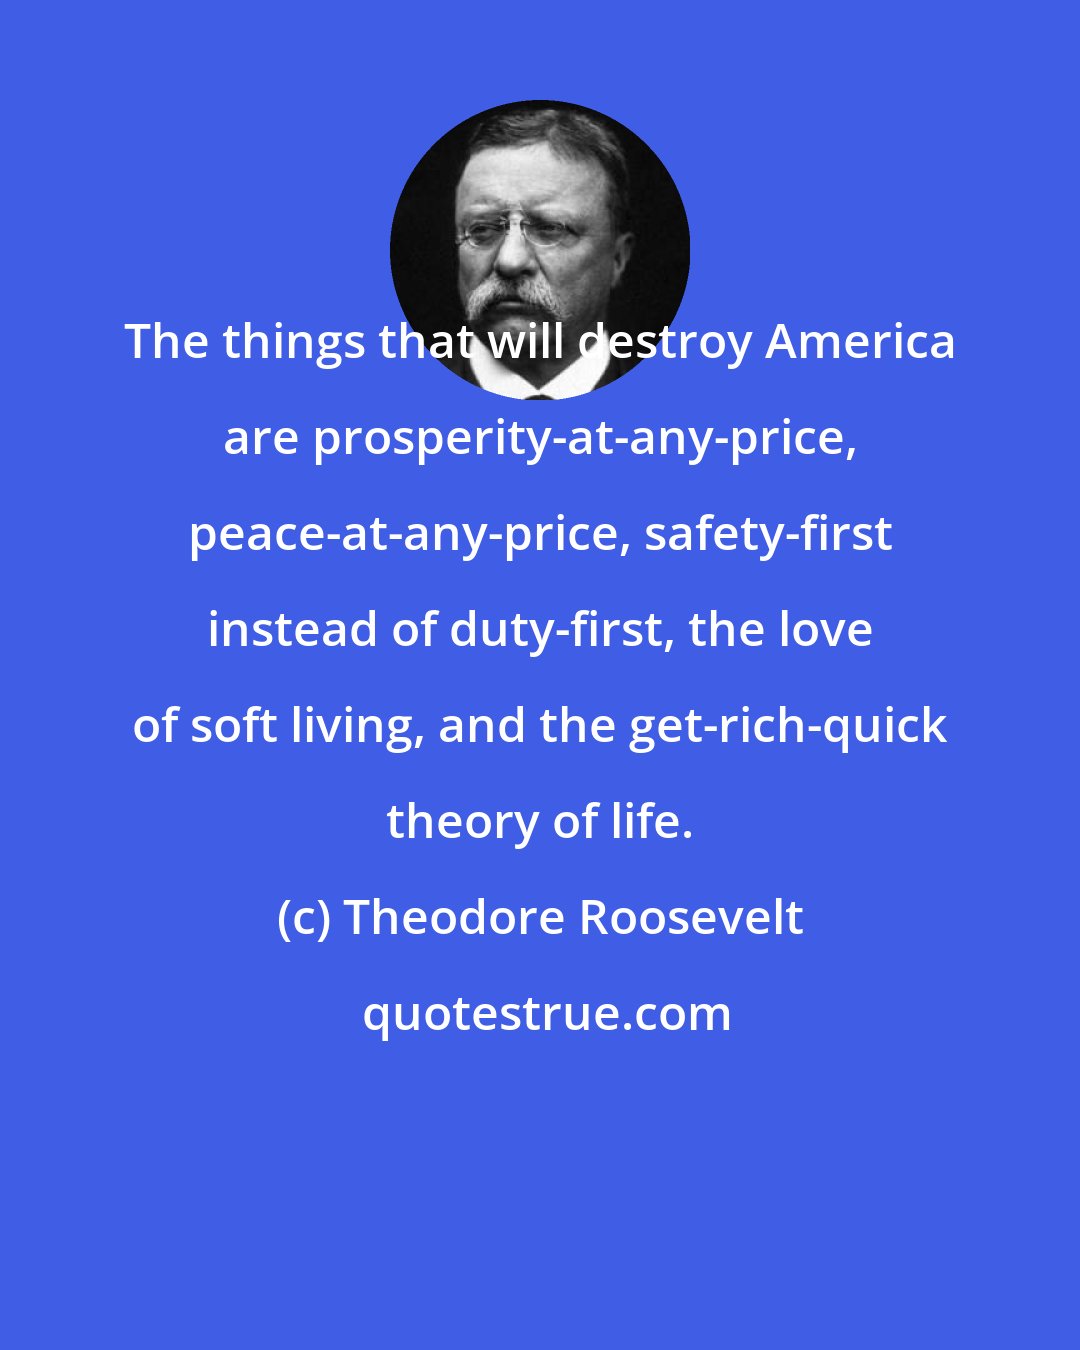 Theodore Roosevelt: The things that will destroy America are prosperity-at-any-price, peace-at-any-price, safety-first instead of duty-first, the love of soft living, and the get-rich-quick theory of life.